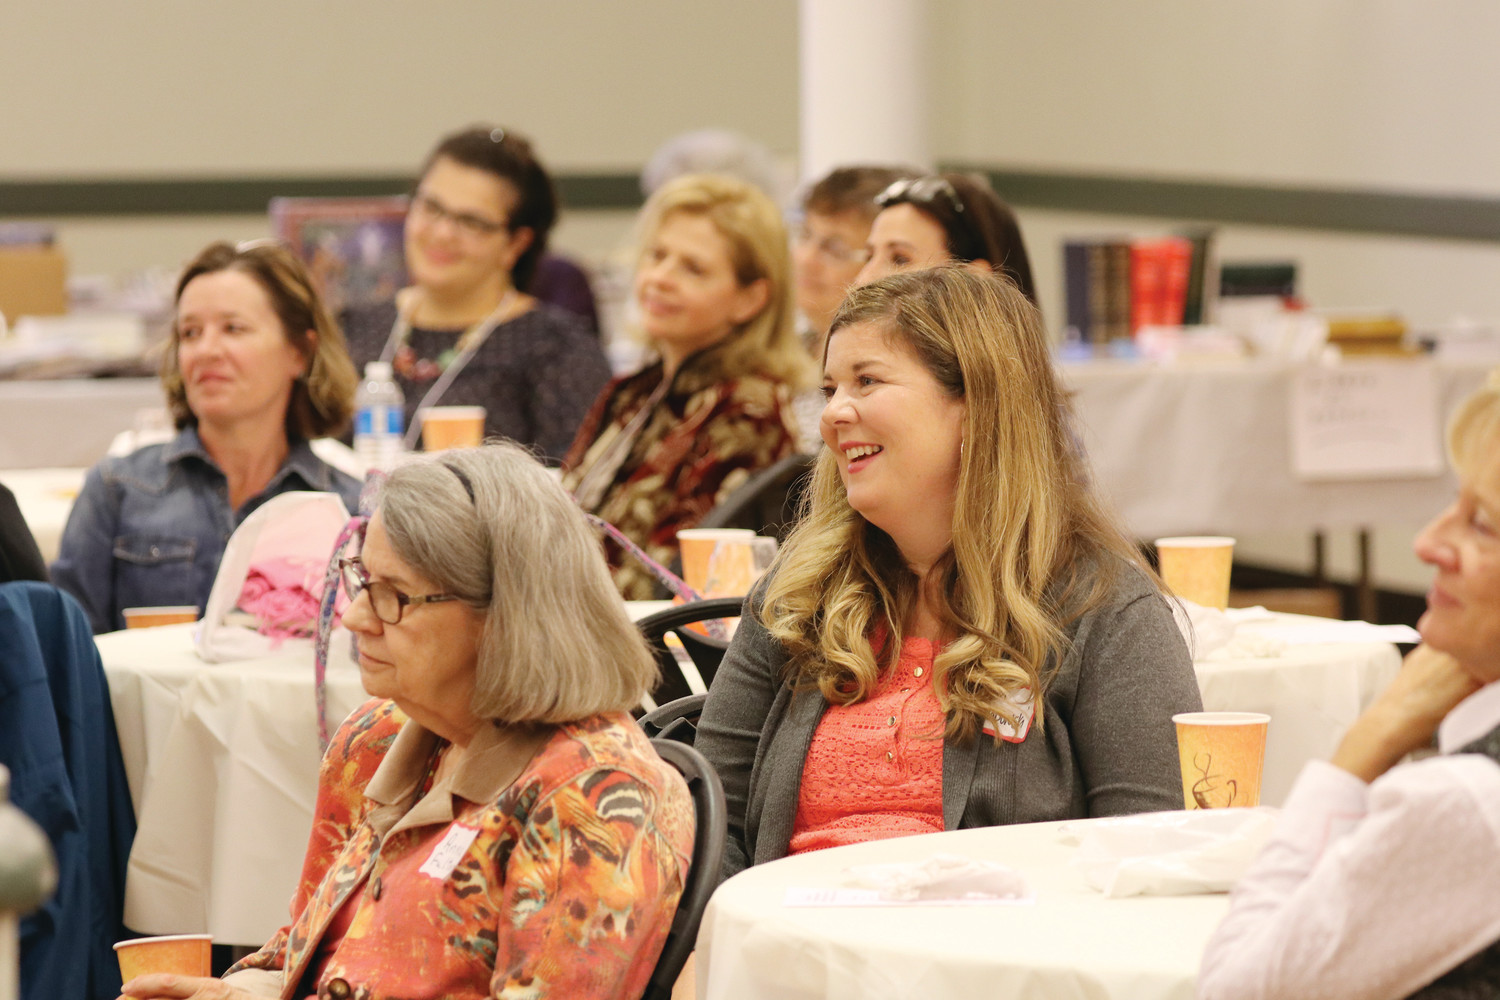 Danielle Bean and Kelly Nieto served as keynote speakers, and brought humor and inspired witnesses to the Catholic Women’s Conference held Oct. 6.